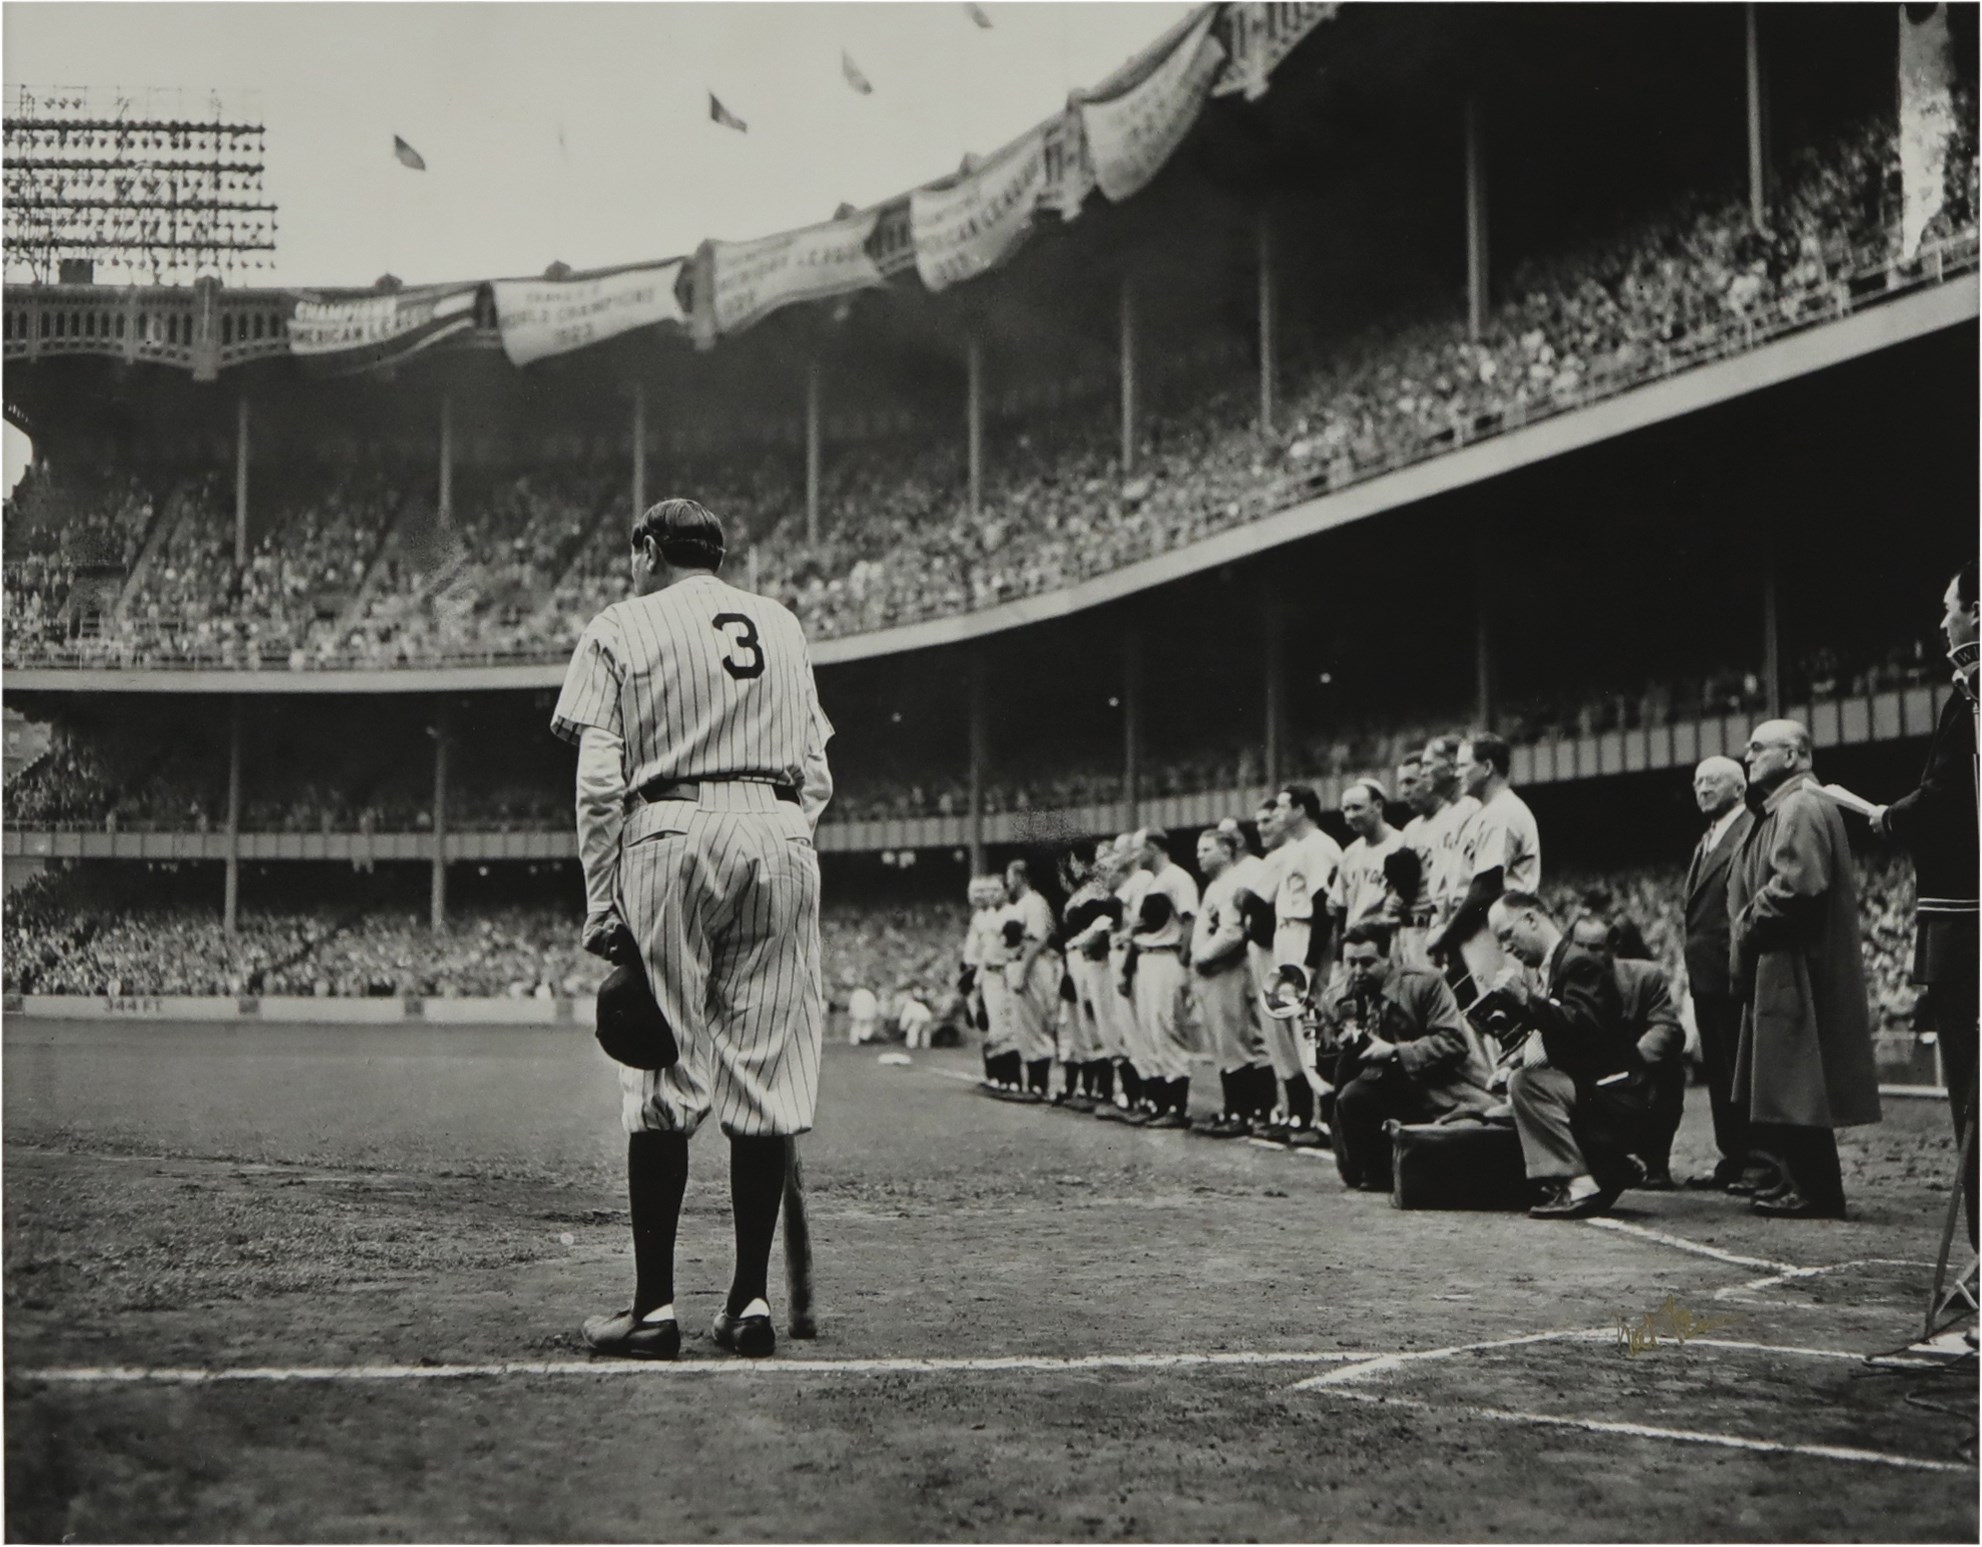 Vintage Sports Photographs - The Babe Bows Out Limited Edition Print Signed by Nat Fein